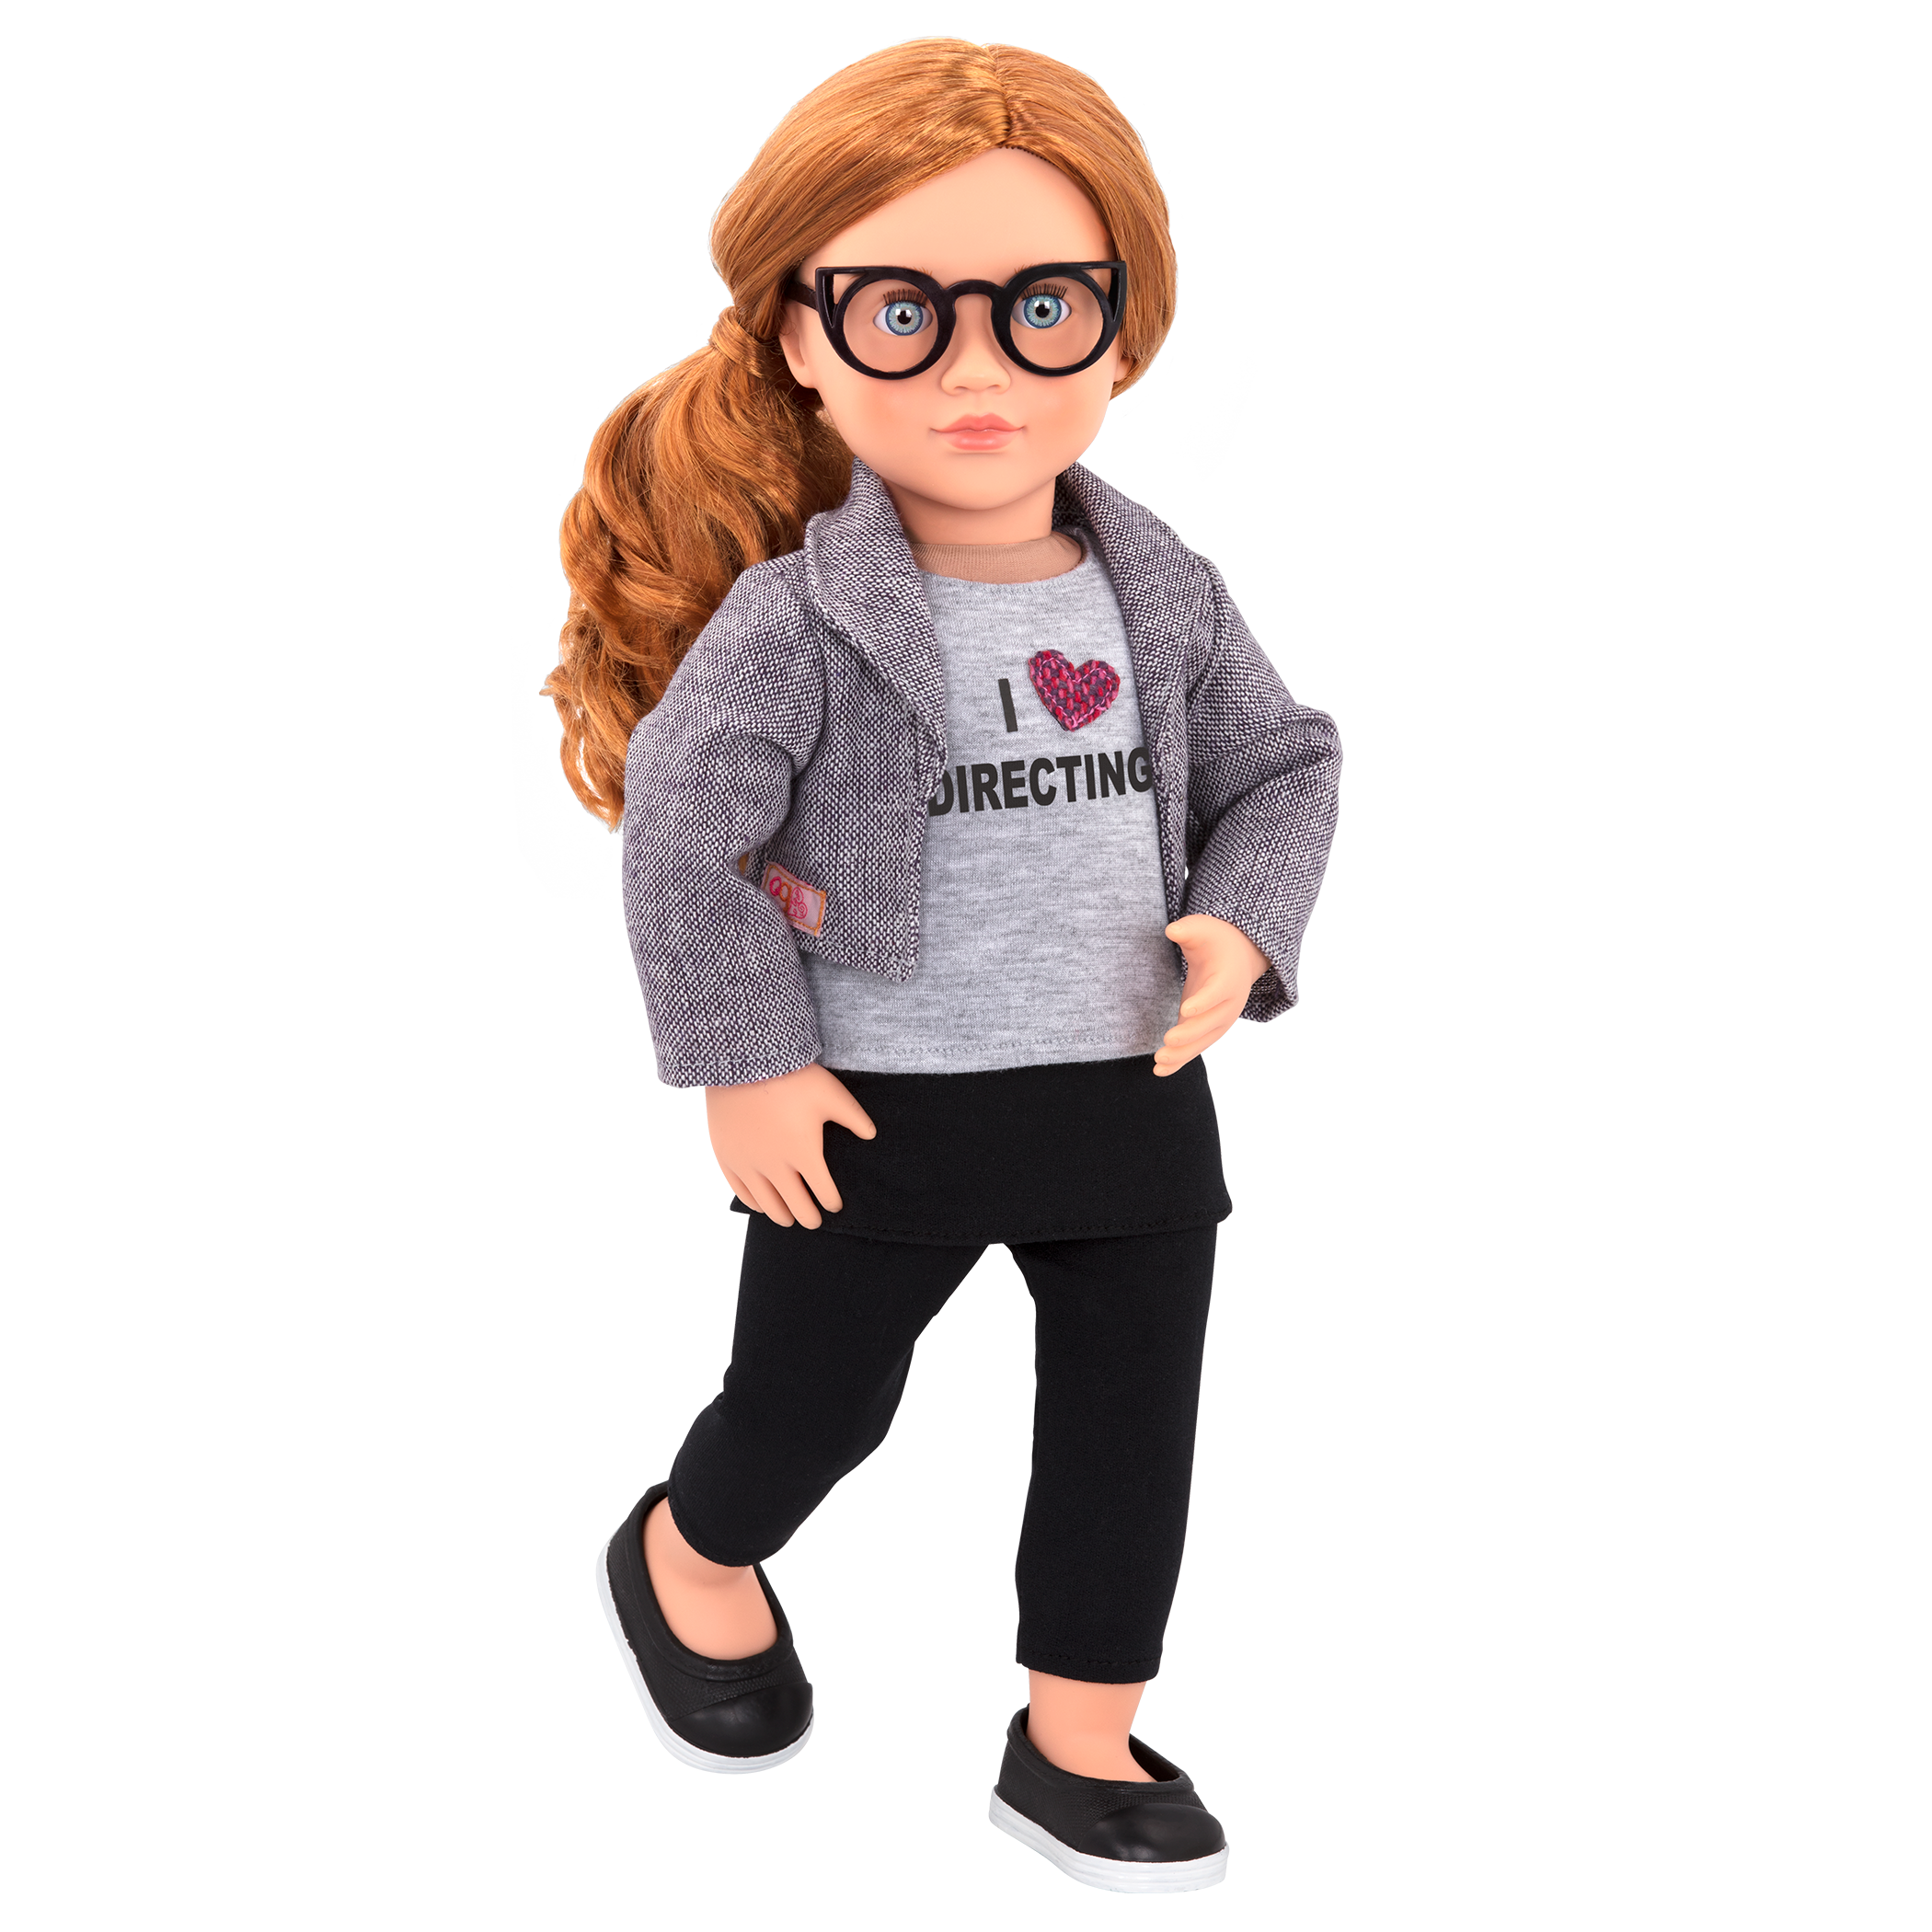 Mienna Deluxe 18-inch Movie Doll in casual outfit